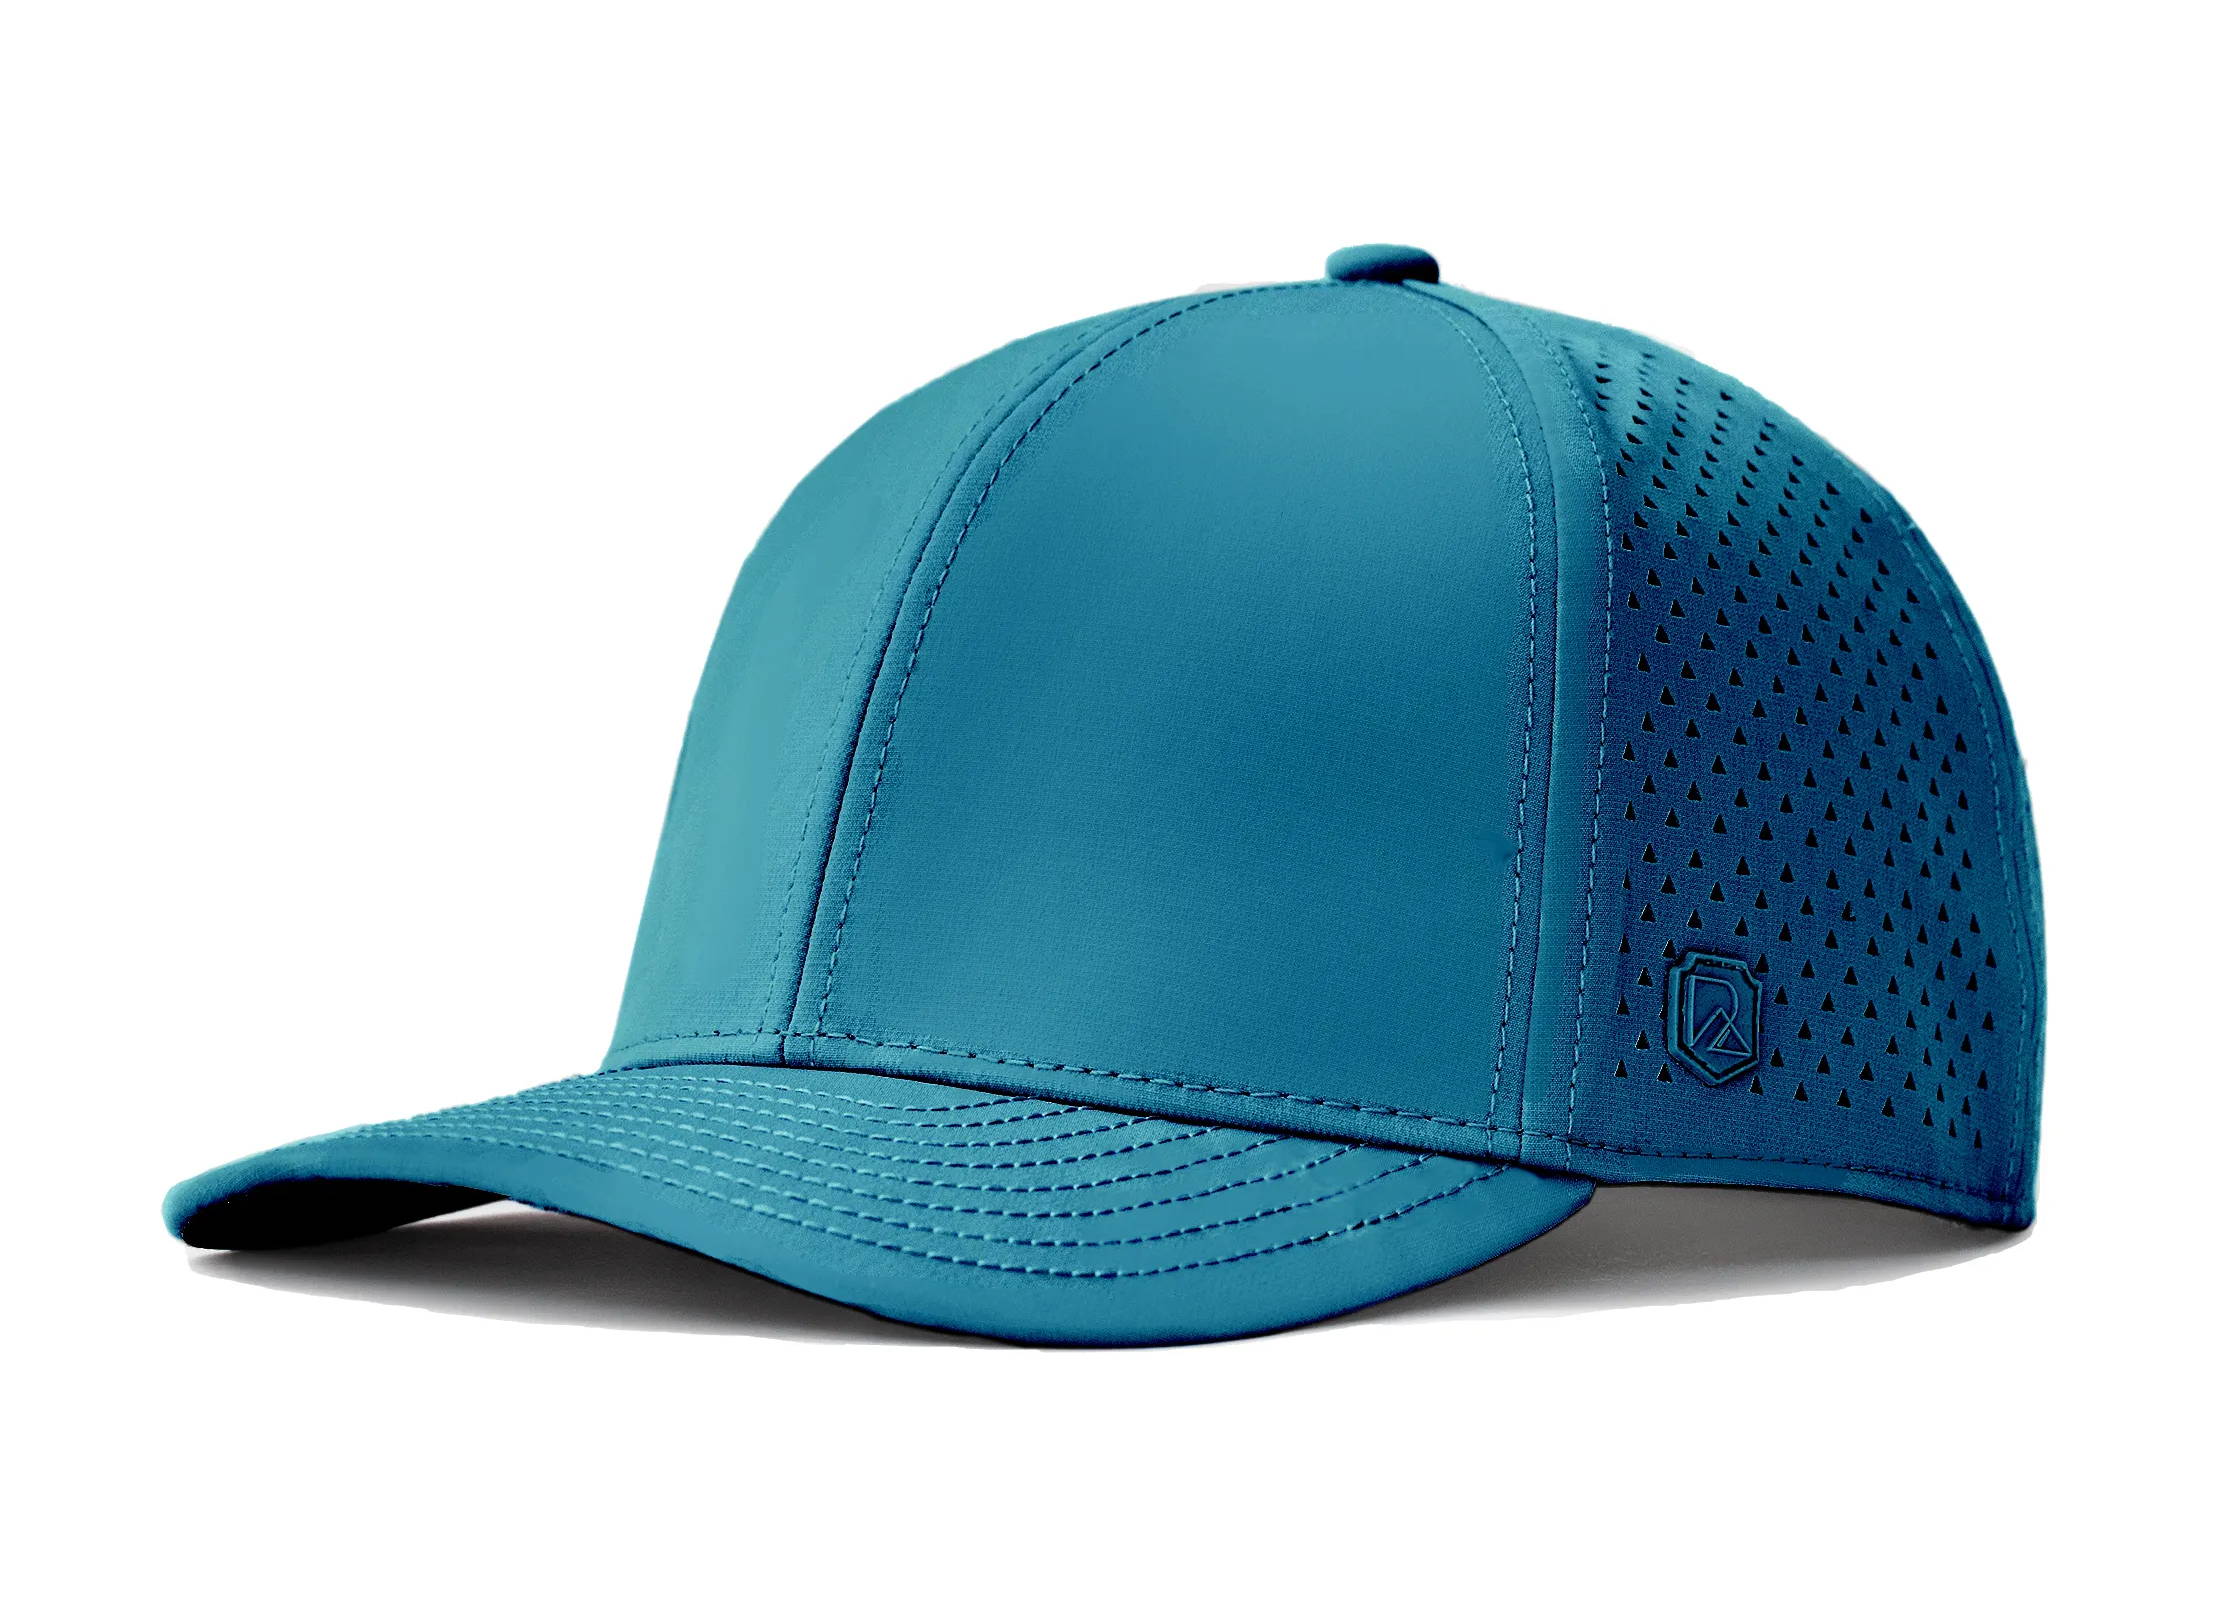 23 Best Golf Hats of 2023 – The Coolest and Most Comfortable